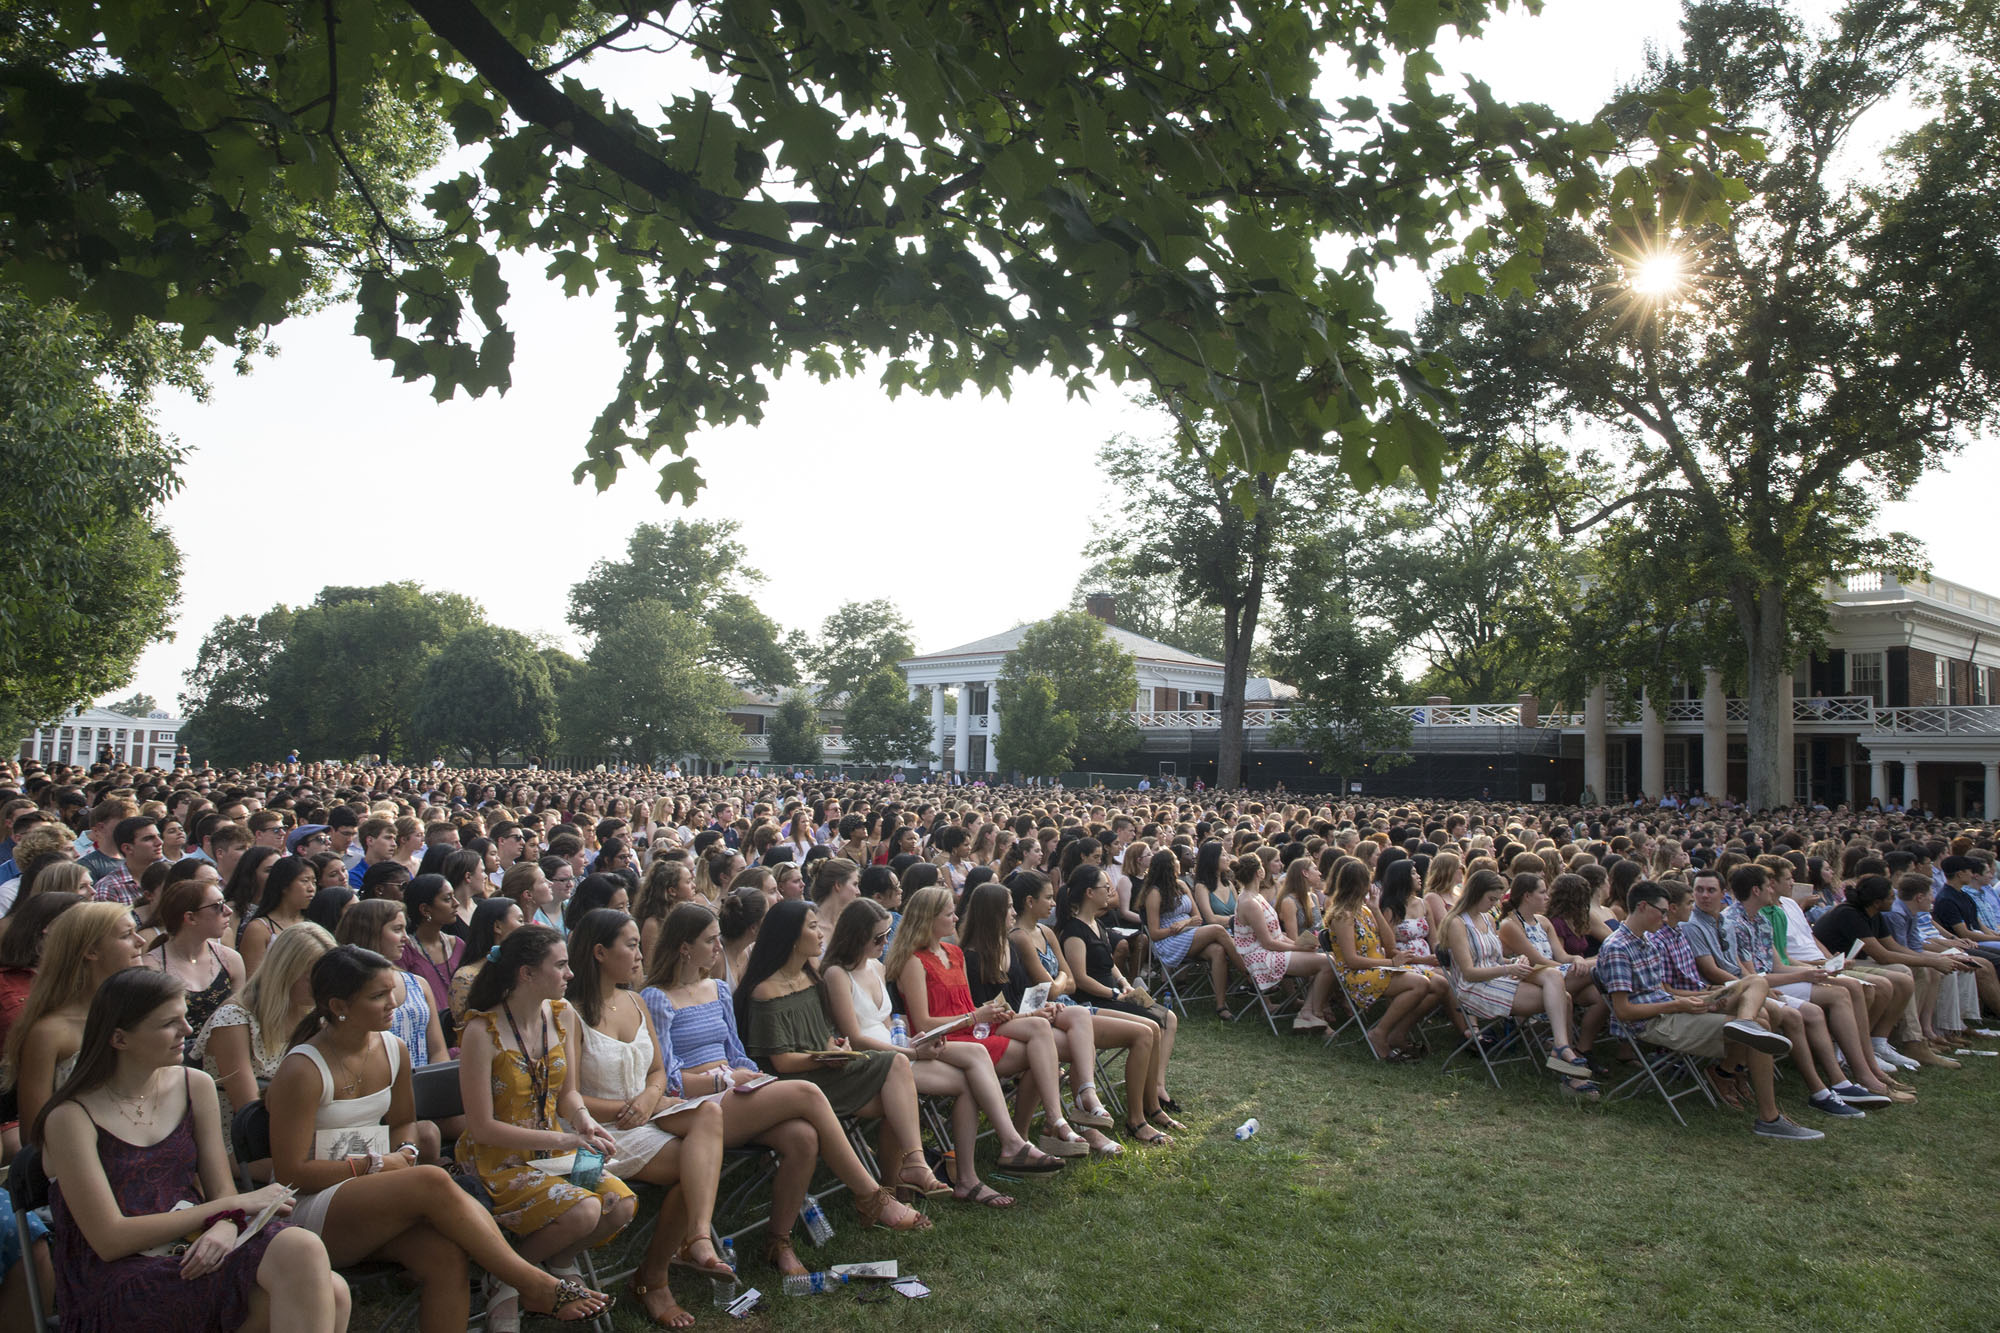 First year students sit in chairs on the lawn listening to speakers